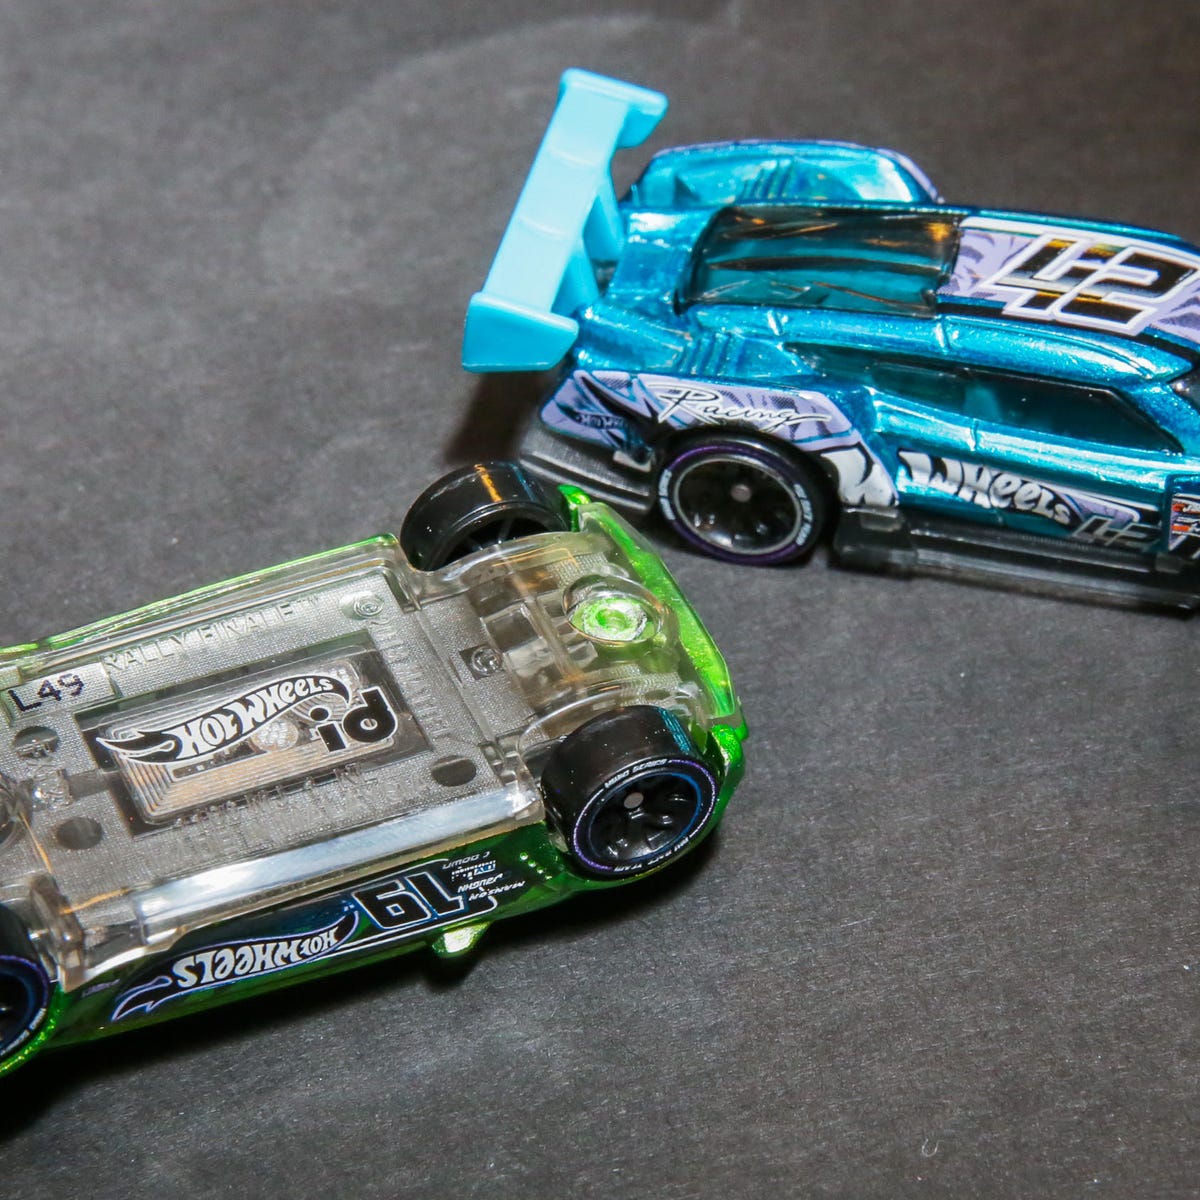 Hot Wheels ID leaps into new playsets, lowers price - CNET